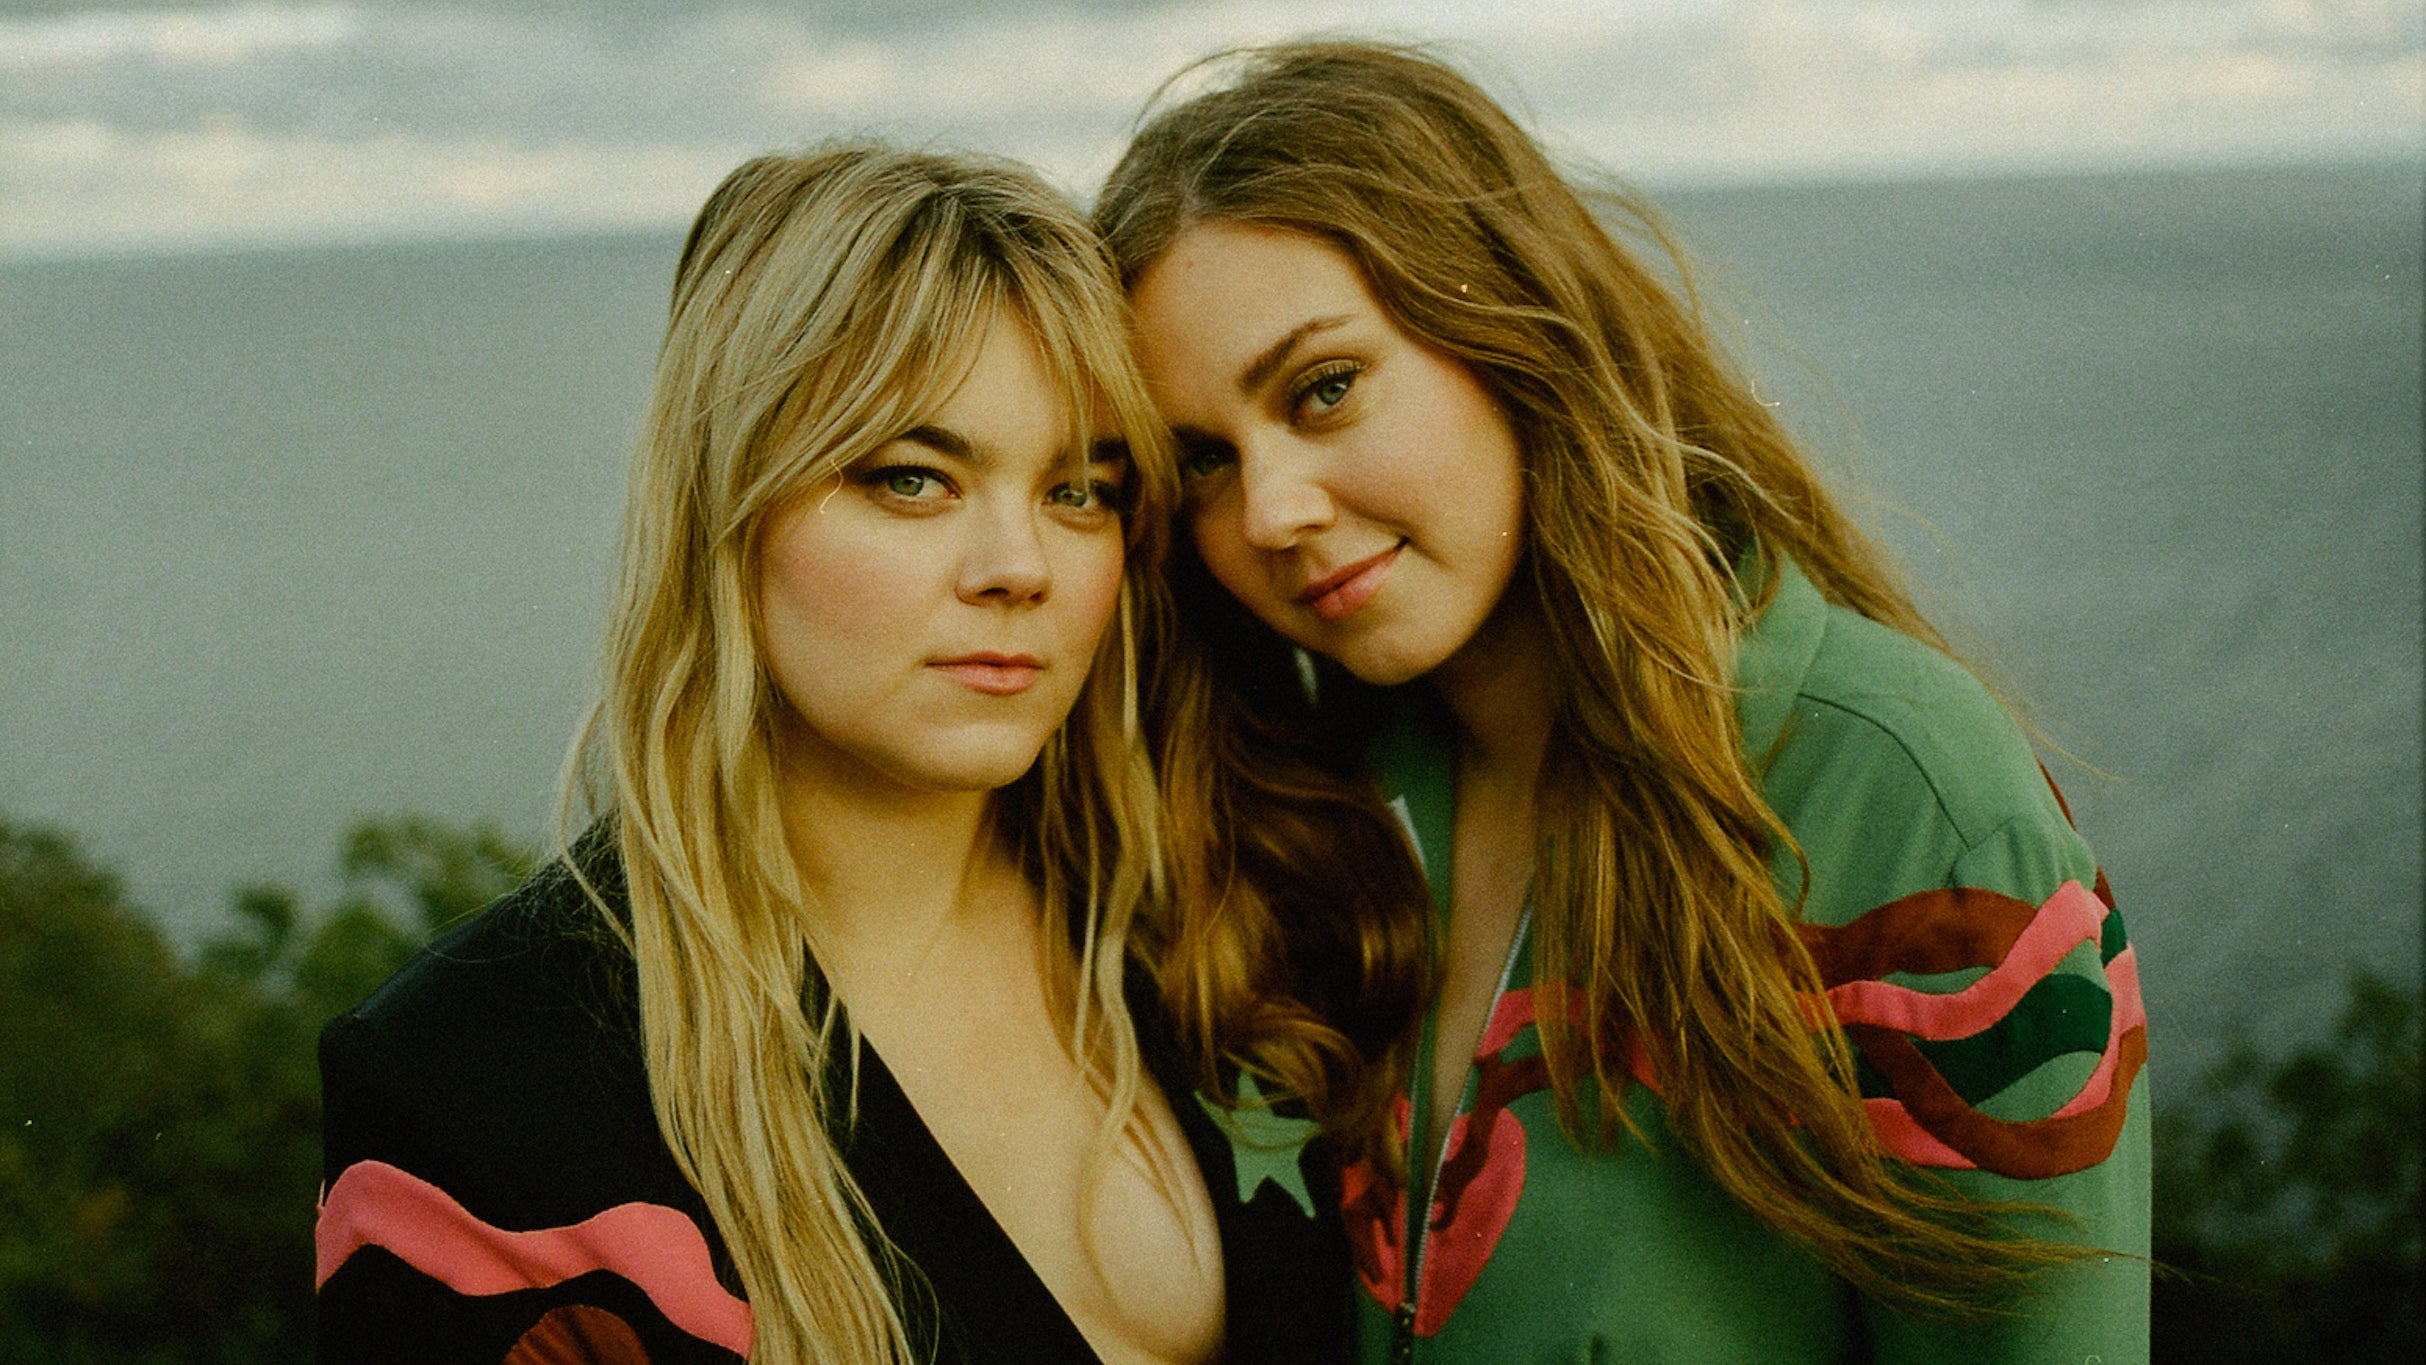 KXT 91.7 Presents First Aid Kit with Courtney Marie Andrews presale code for concert tickets in Dallas, TX (House of Blues Dallas )